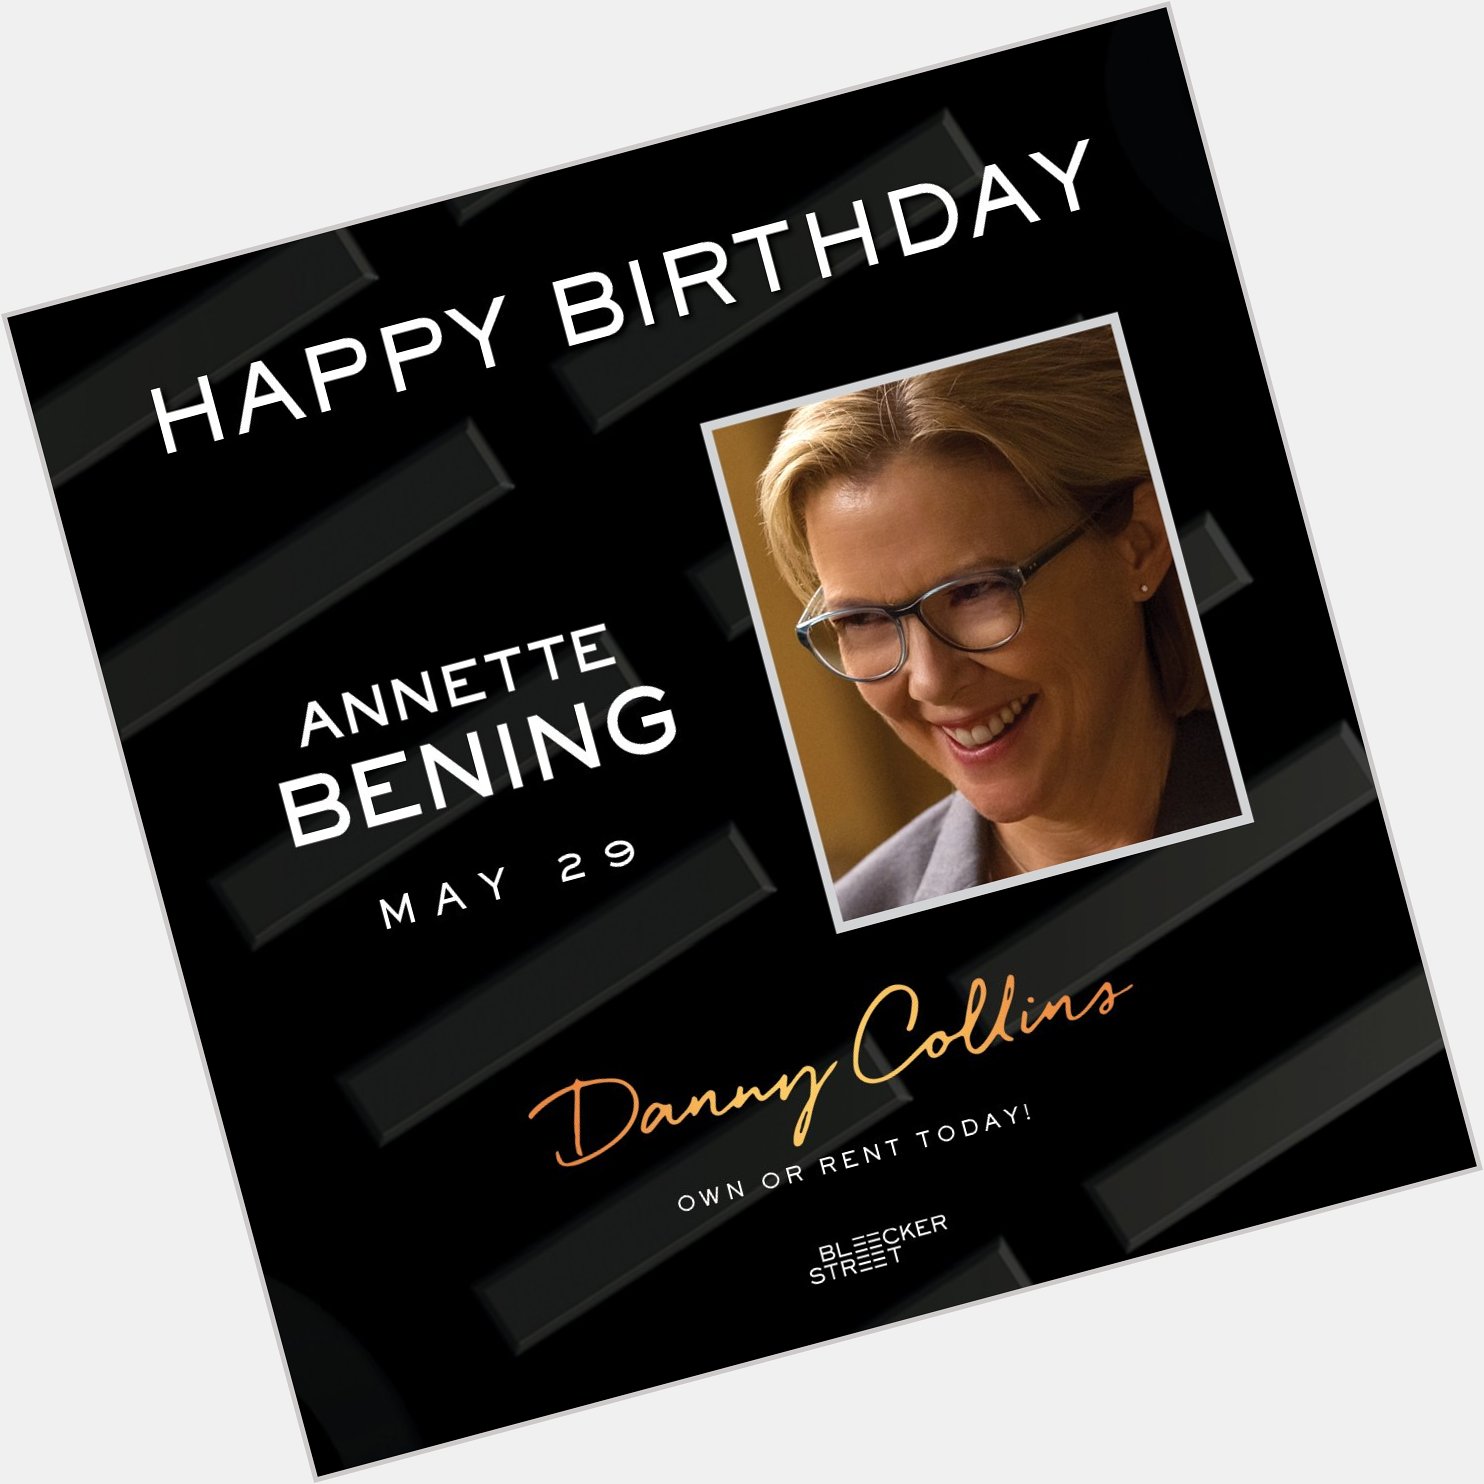 Happy birthday Annette Bening! Watch her in Danny Collins Today:  